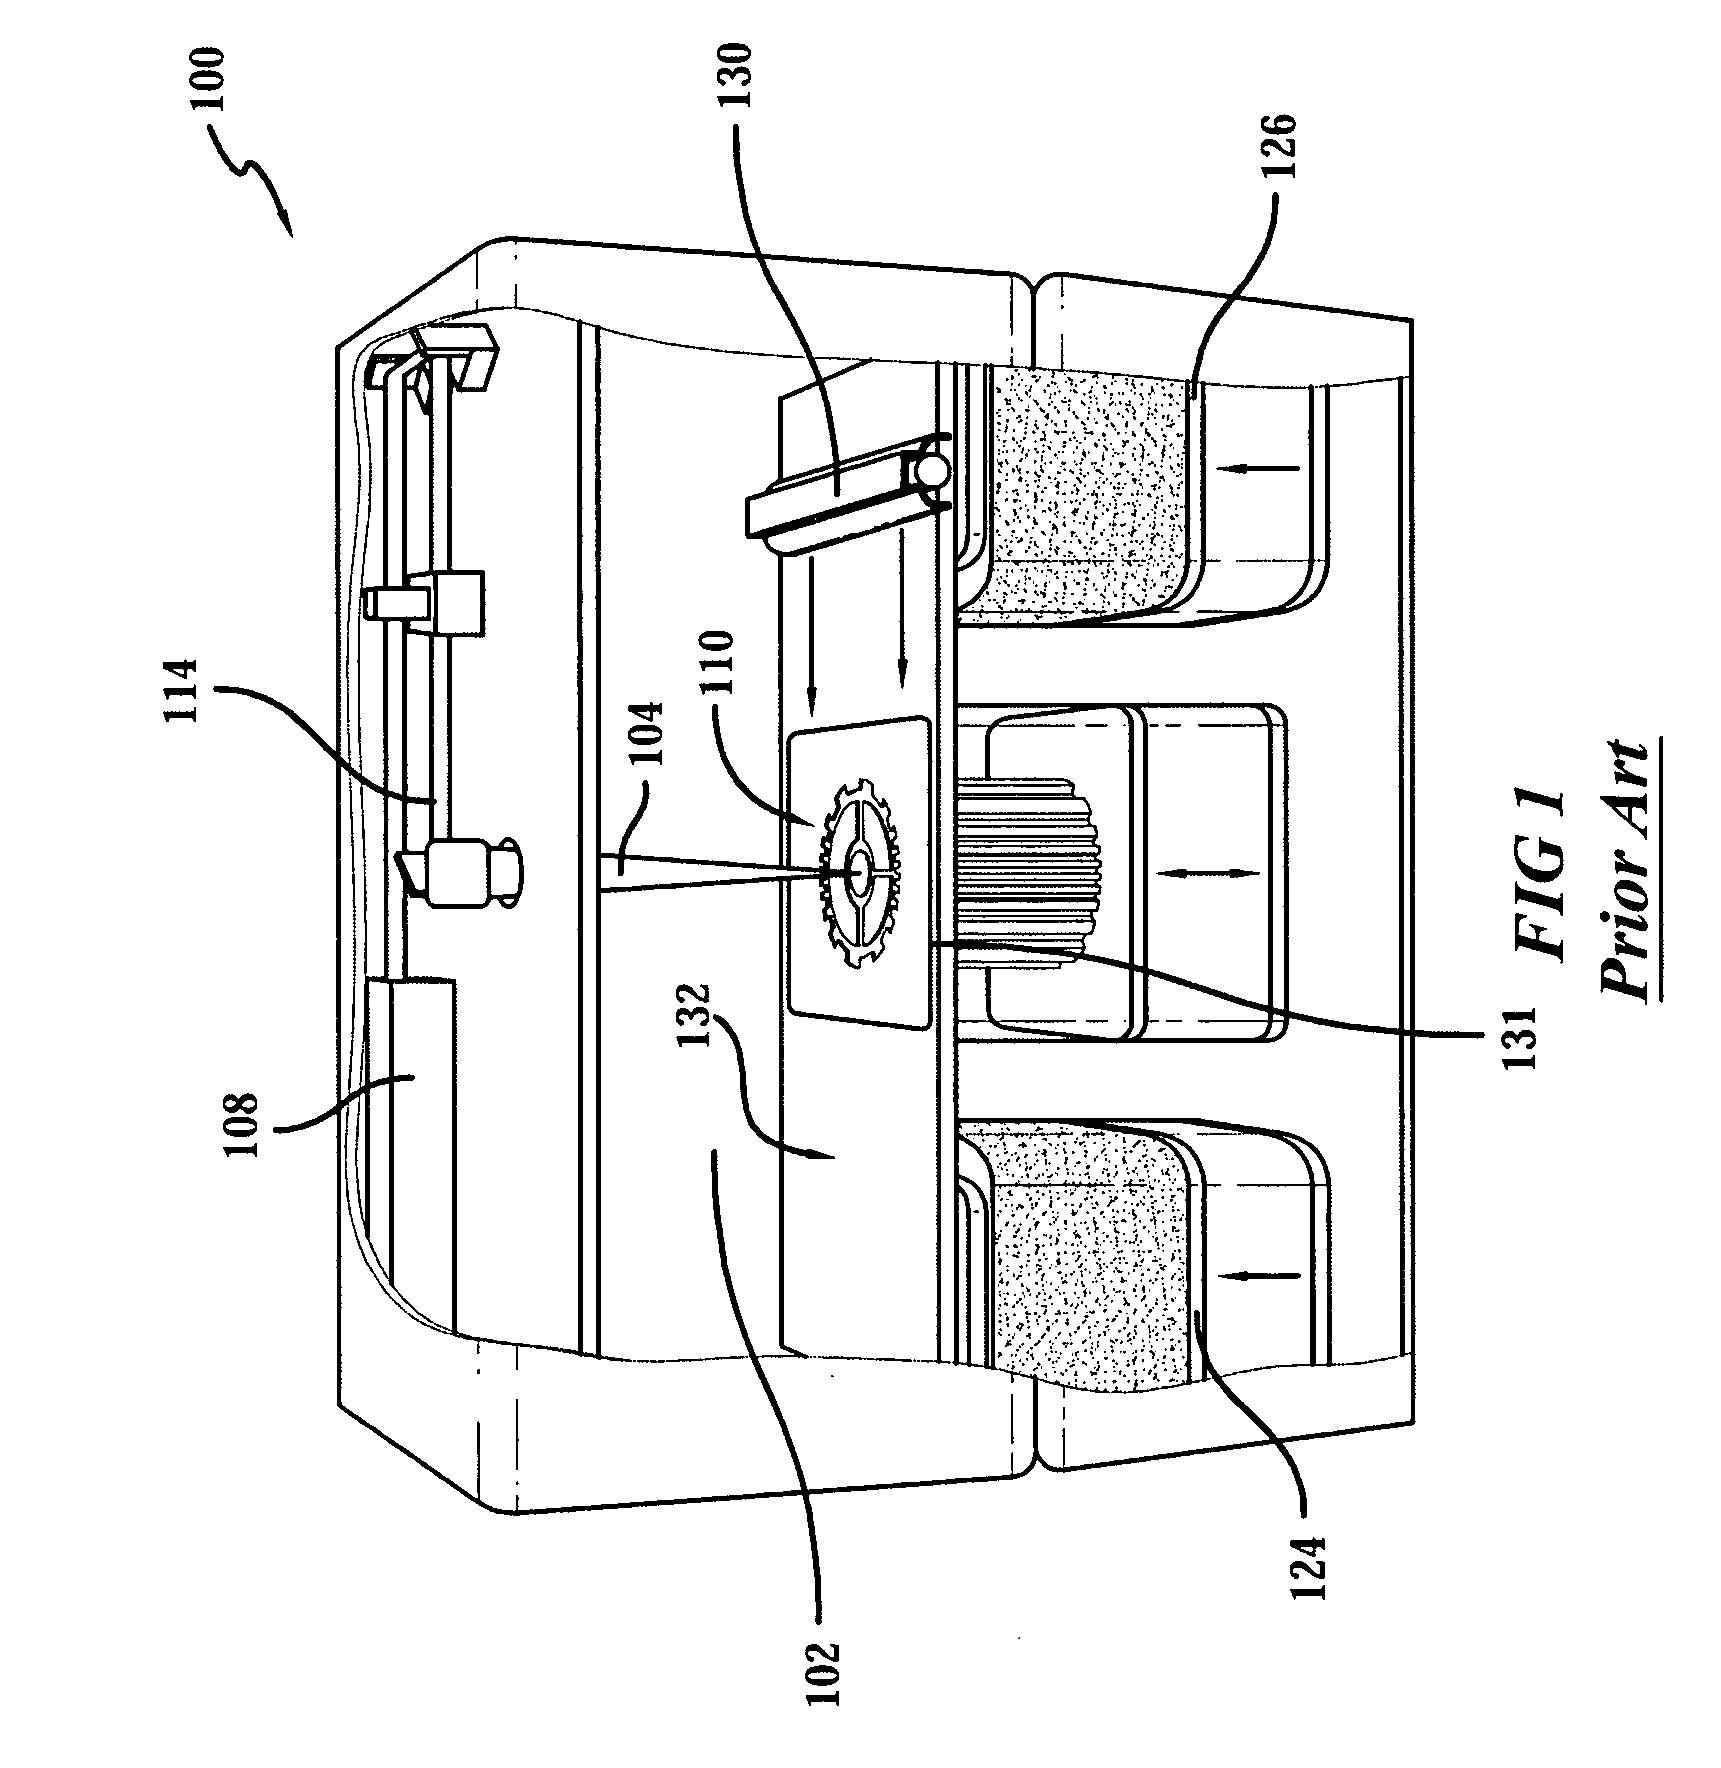 Single side feed parked powder wave heating with wave flattener